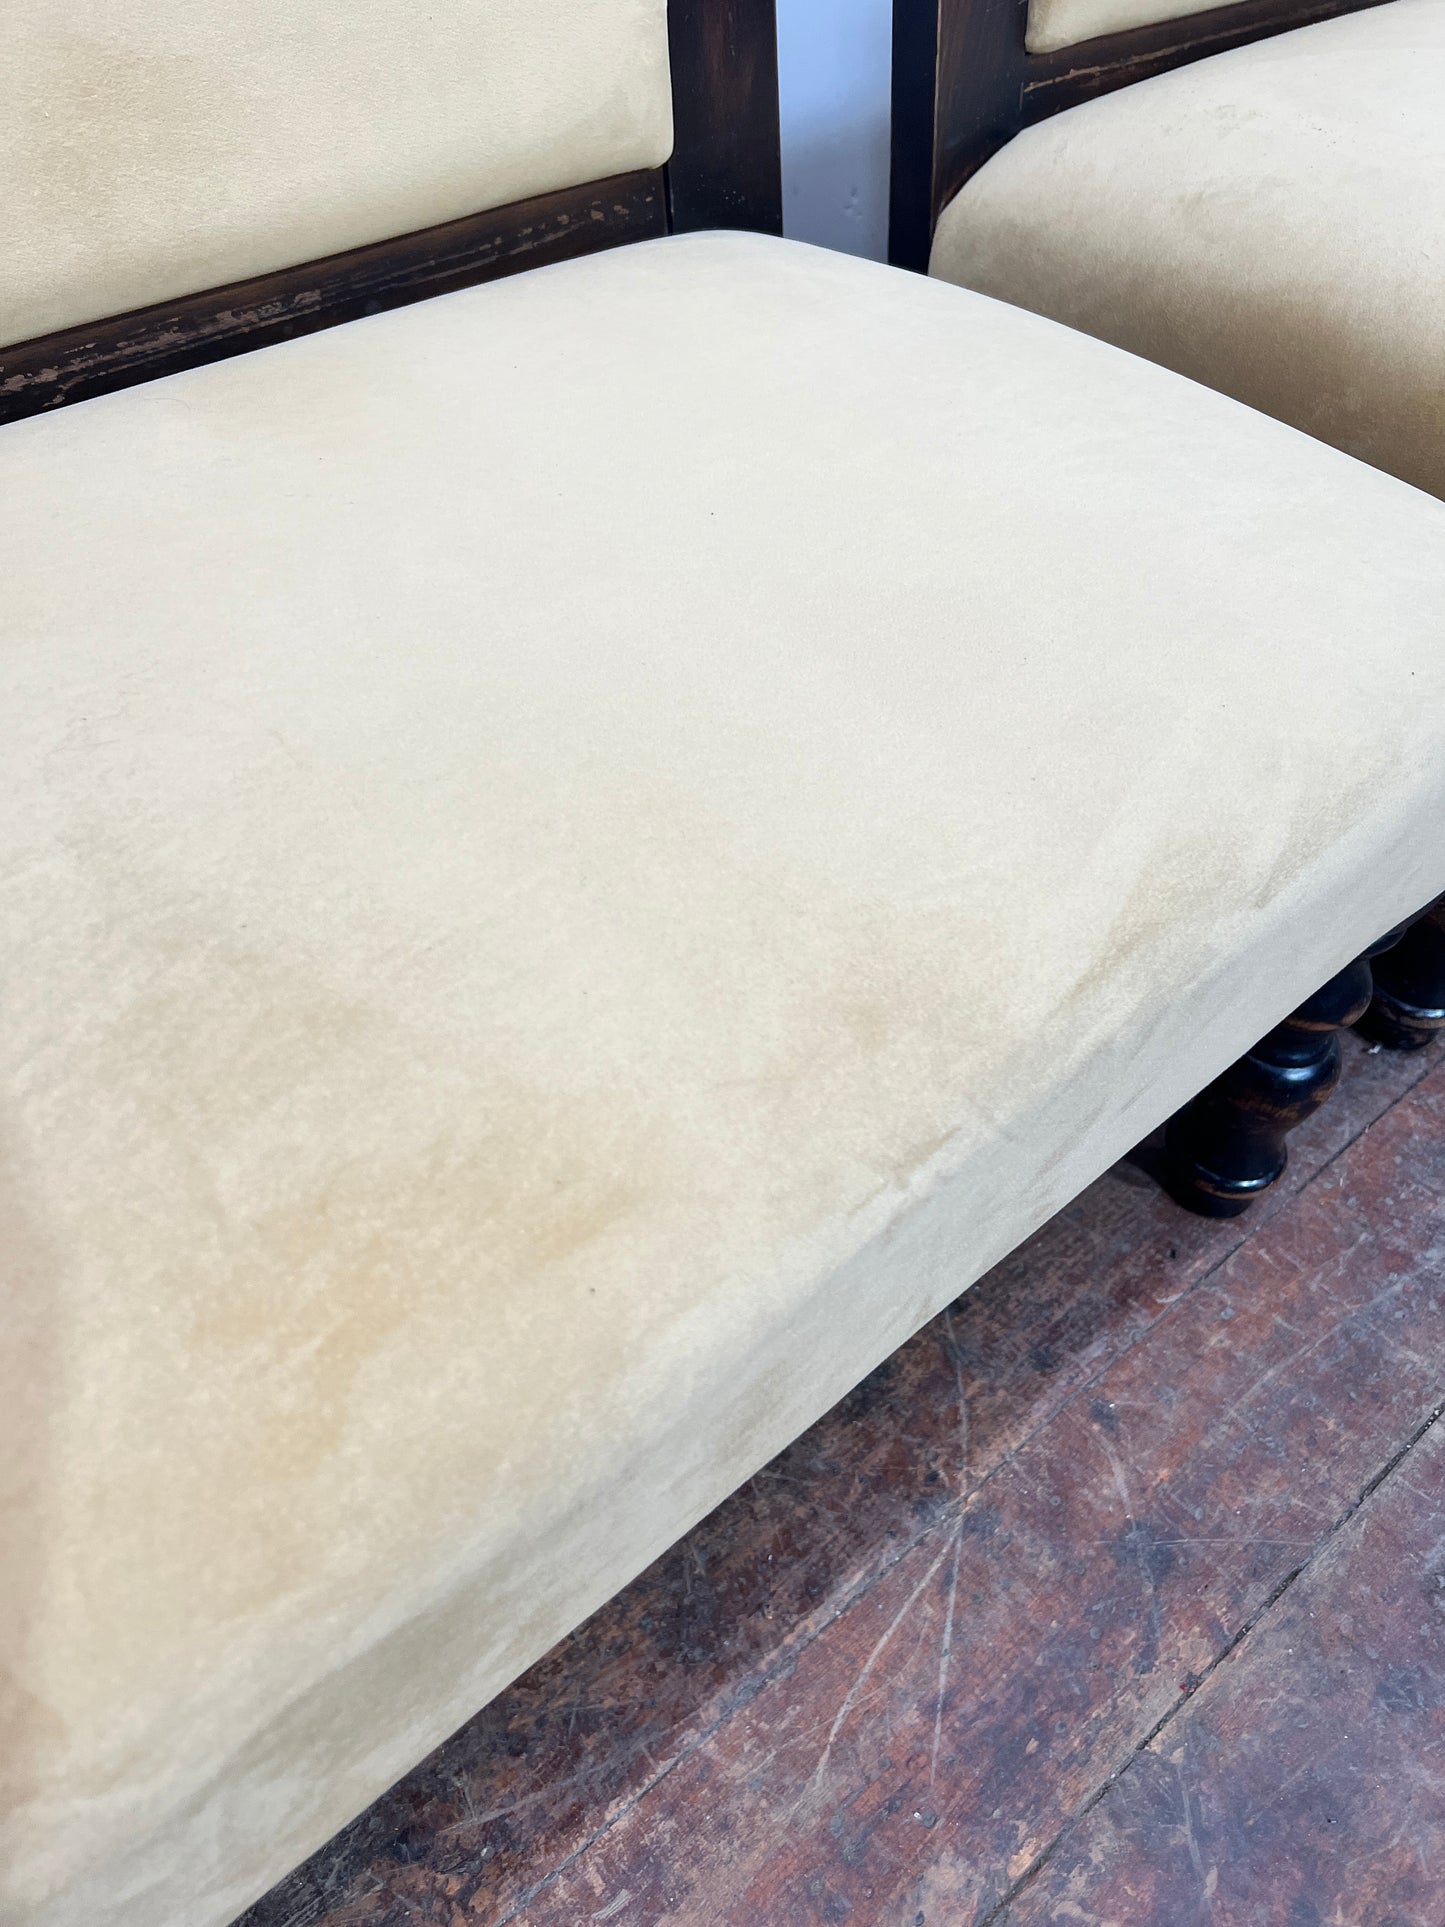 Pair of Reupholstered Yellow Benches